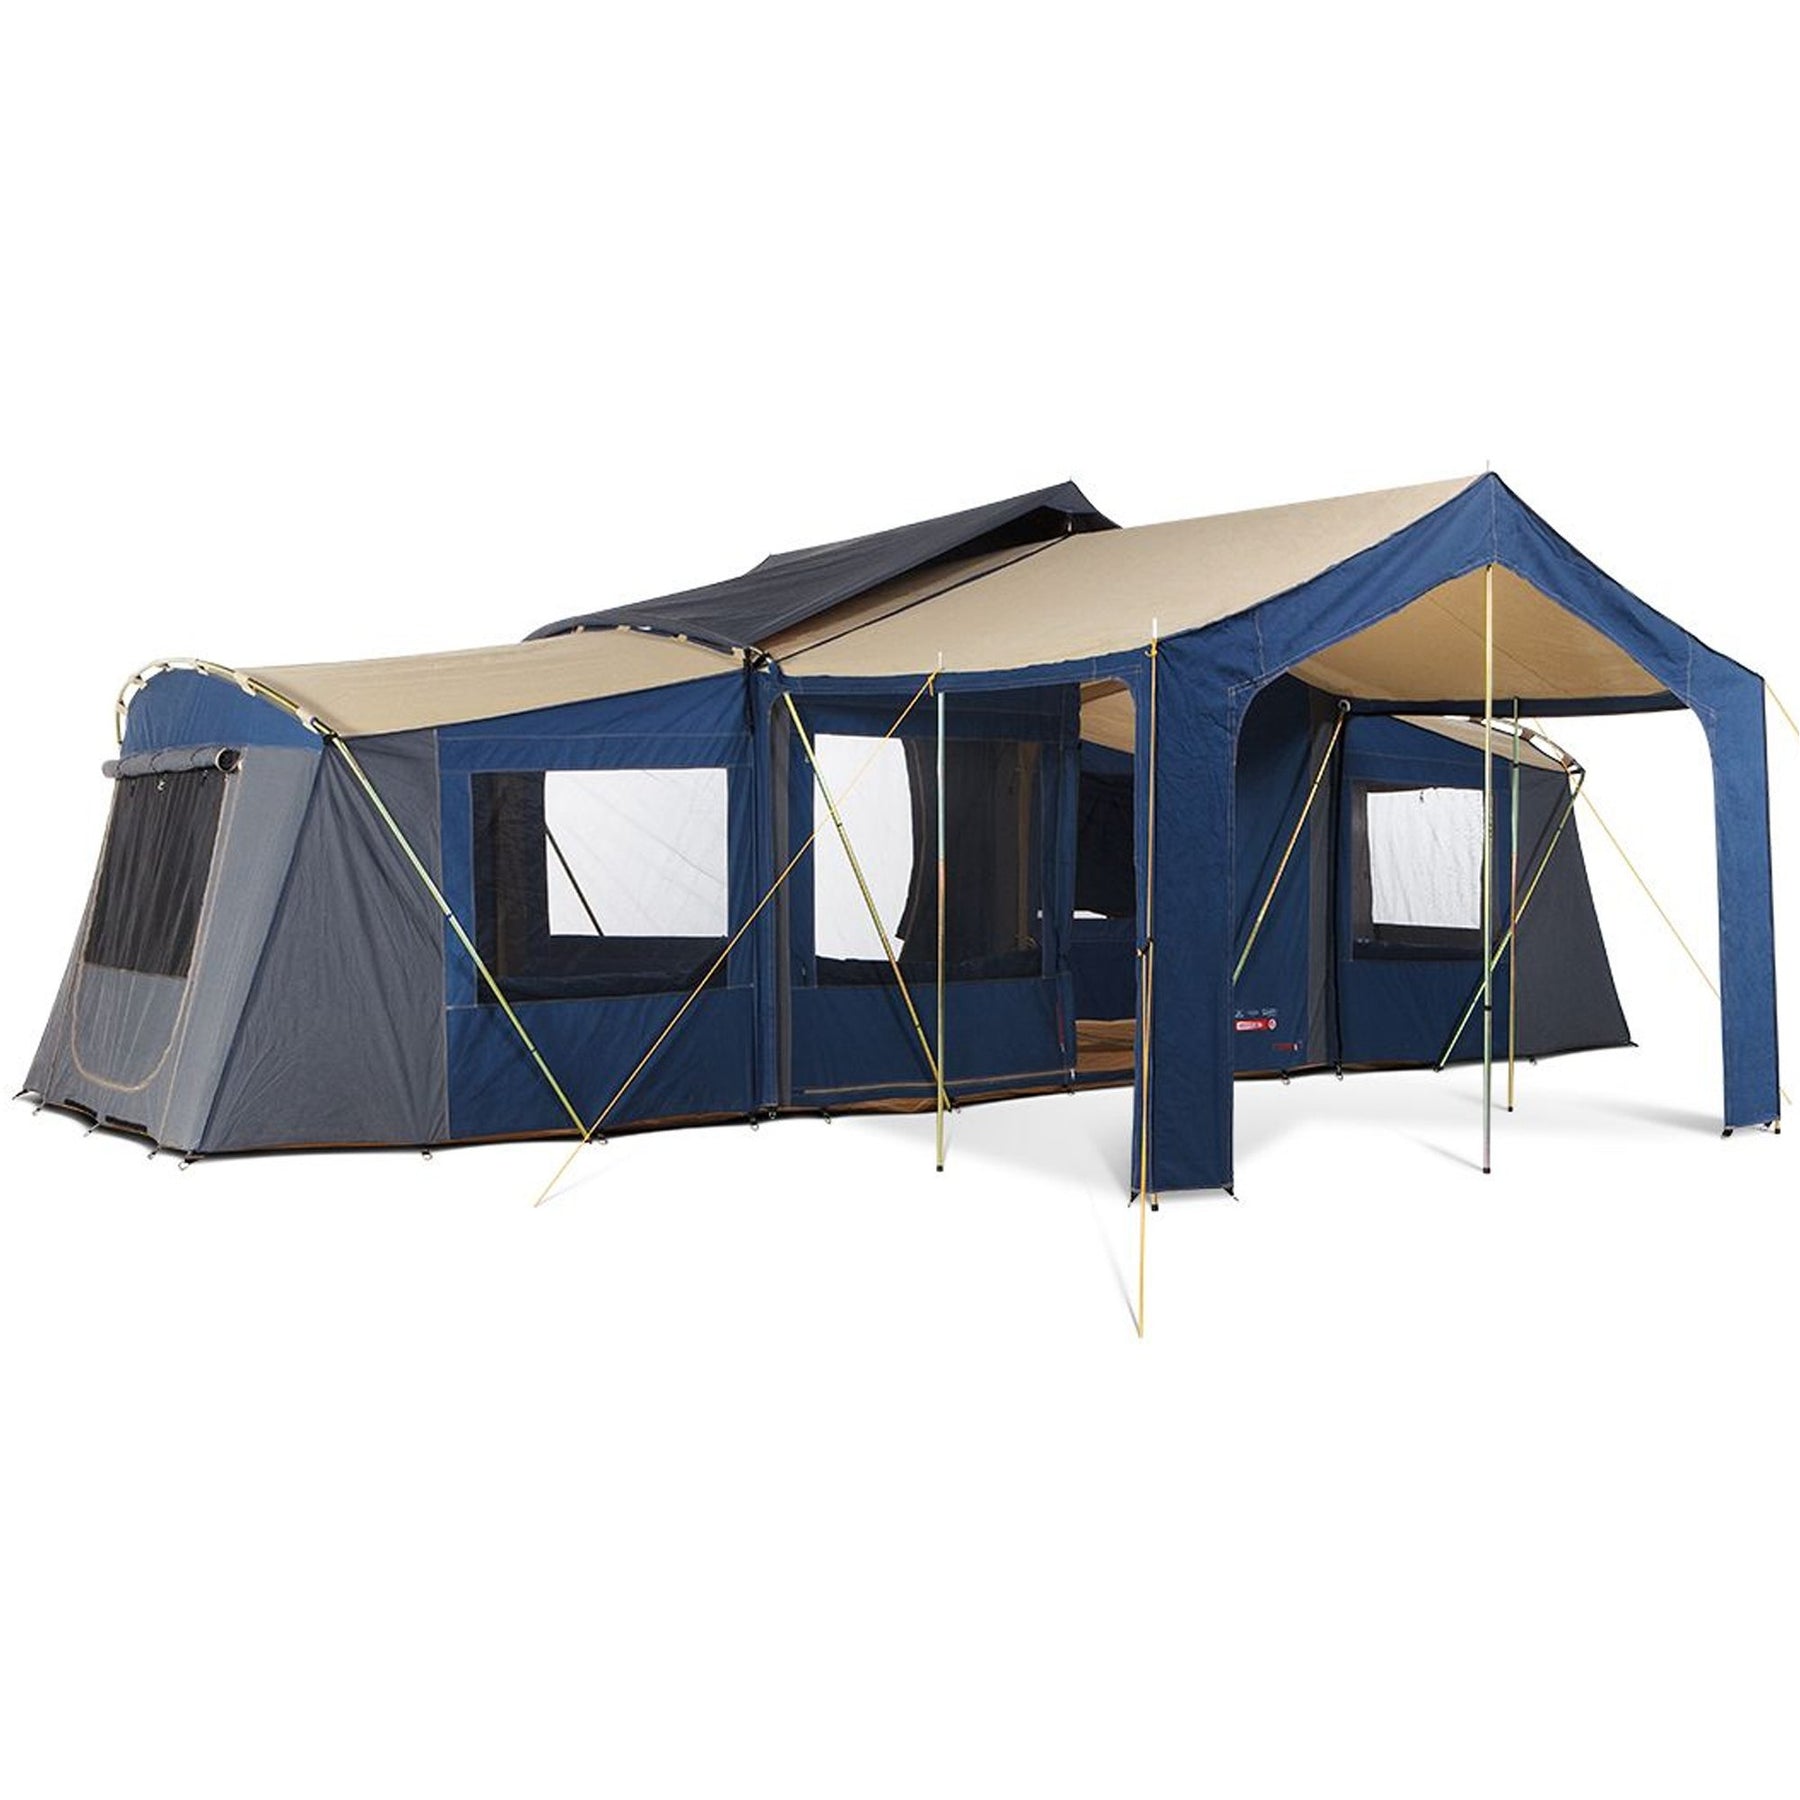 Homestead Deluxe Family Canvas Tent Dwights Outdoors